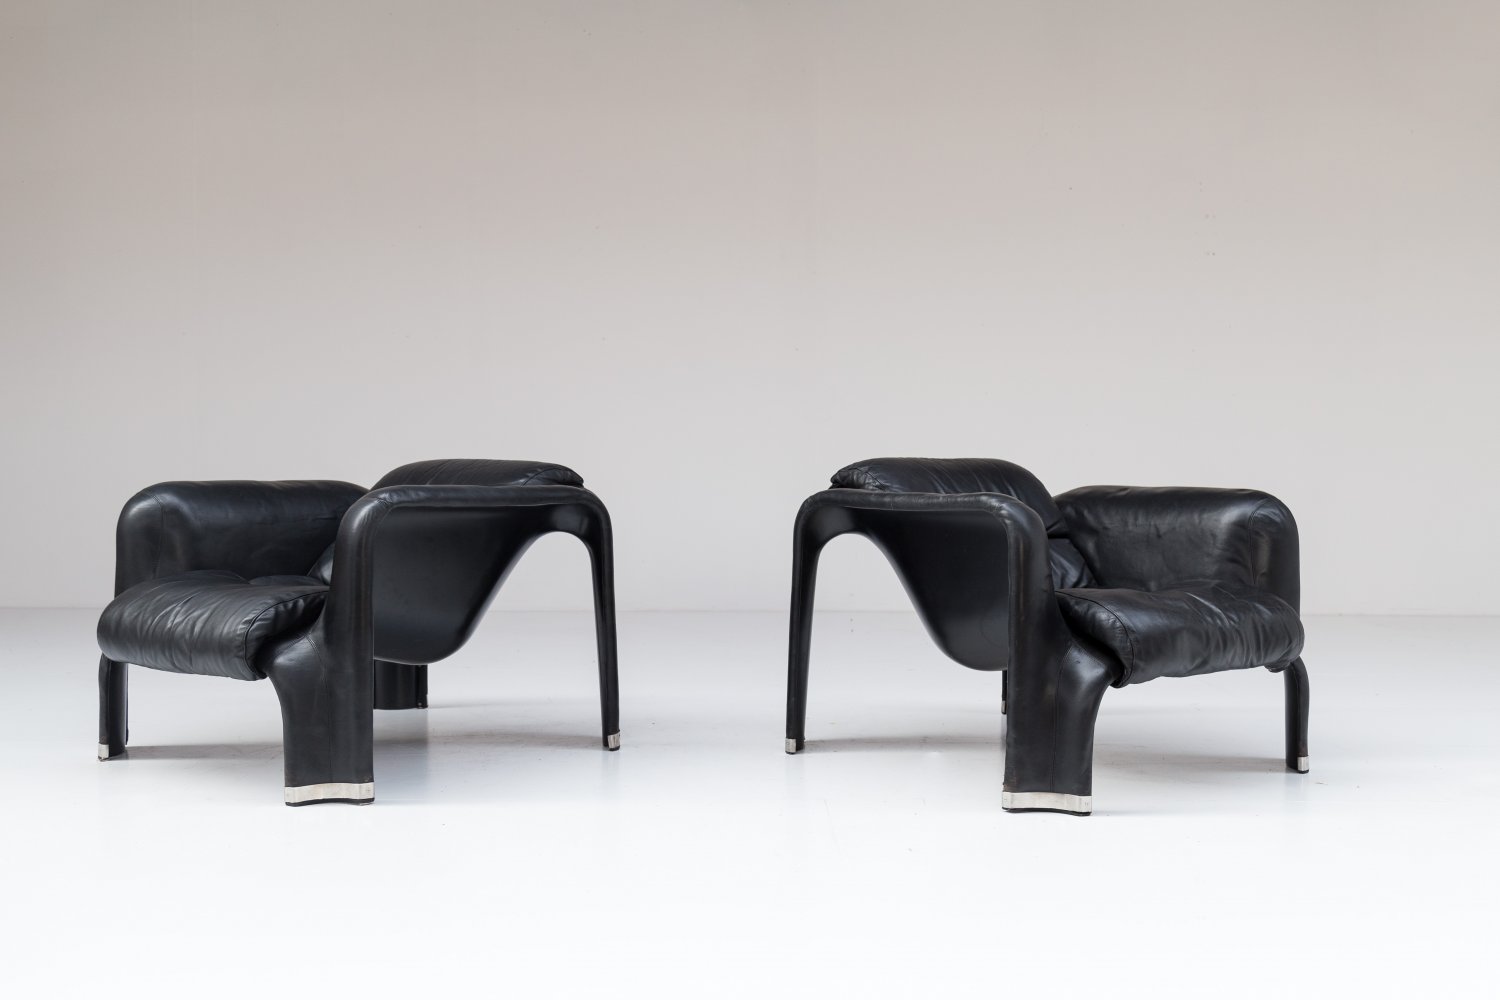 Pair of black leather Pohjola chairs by Pekka Perjo for Haimi Finland.